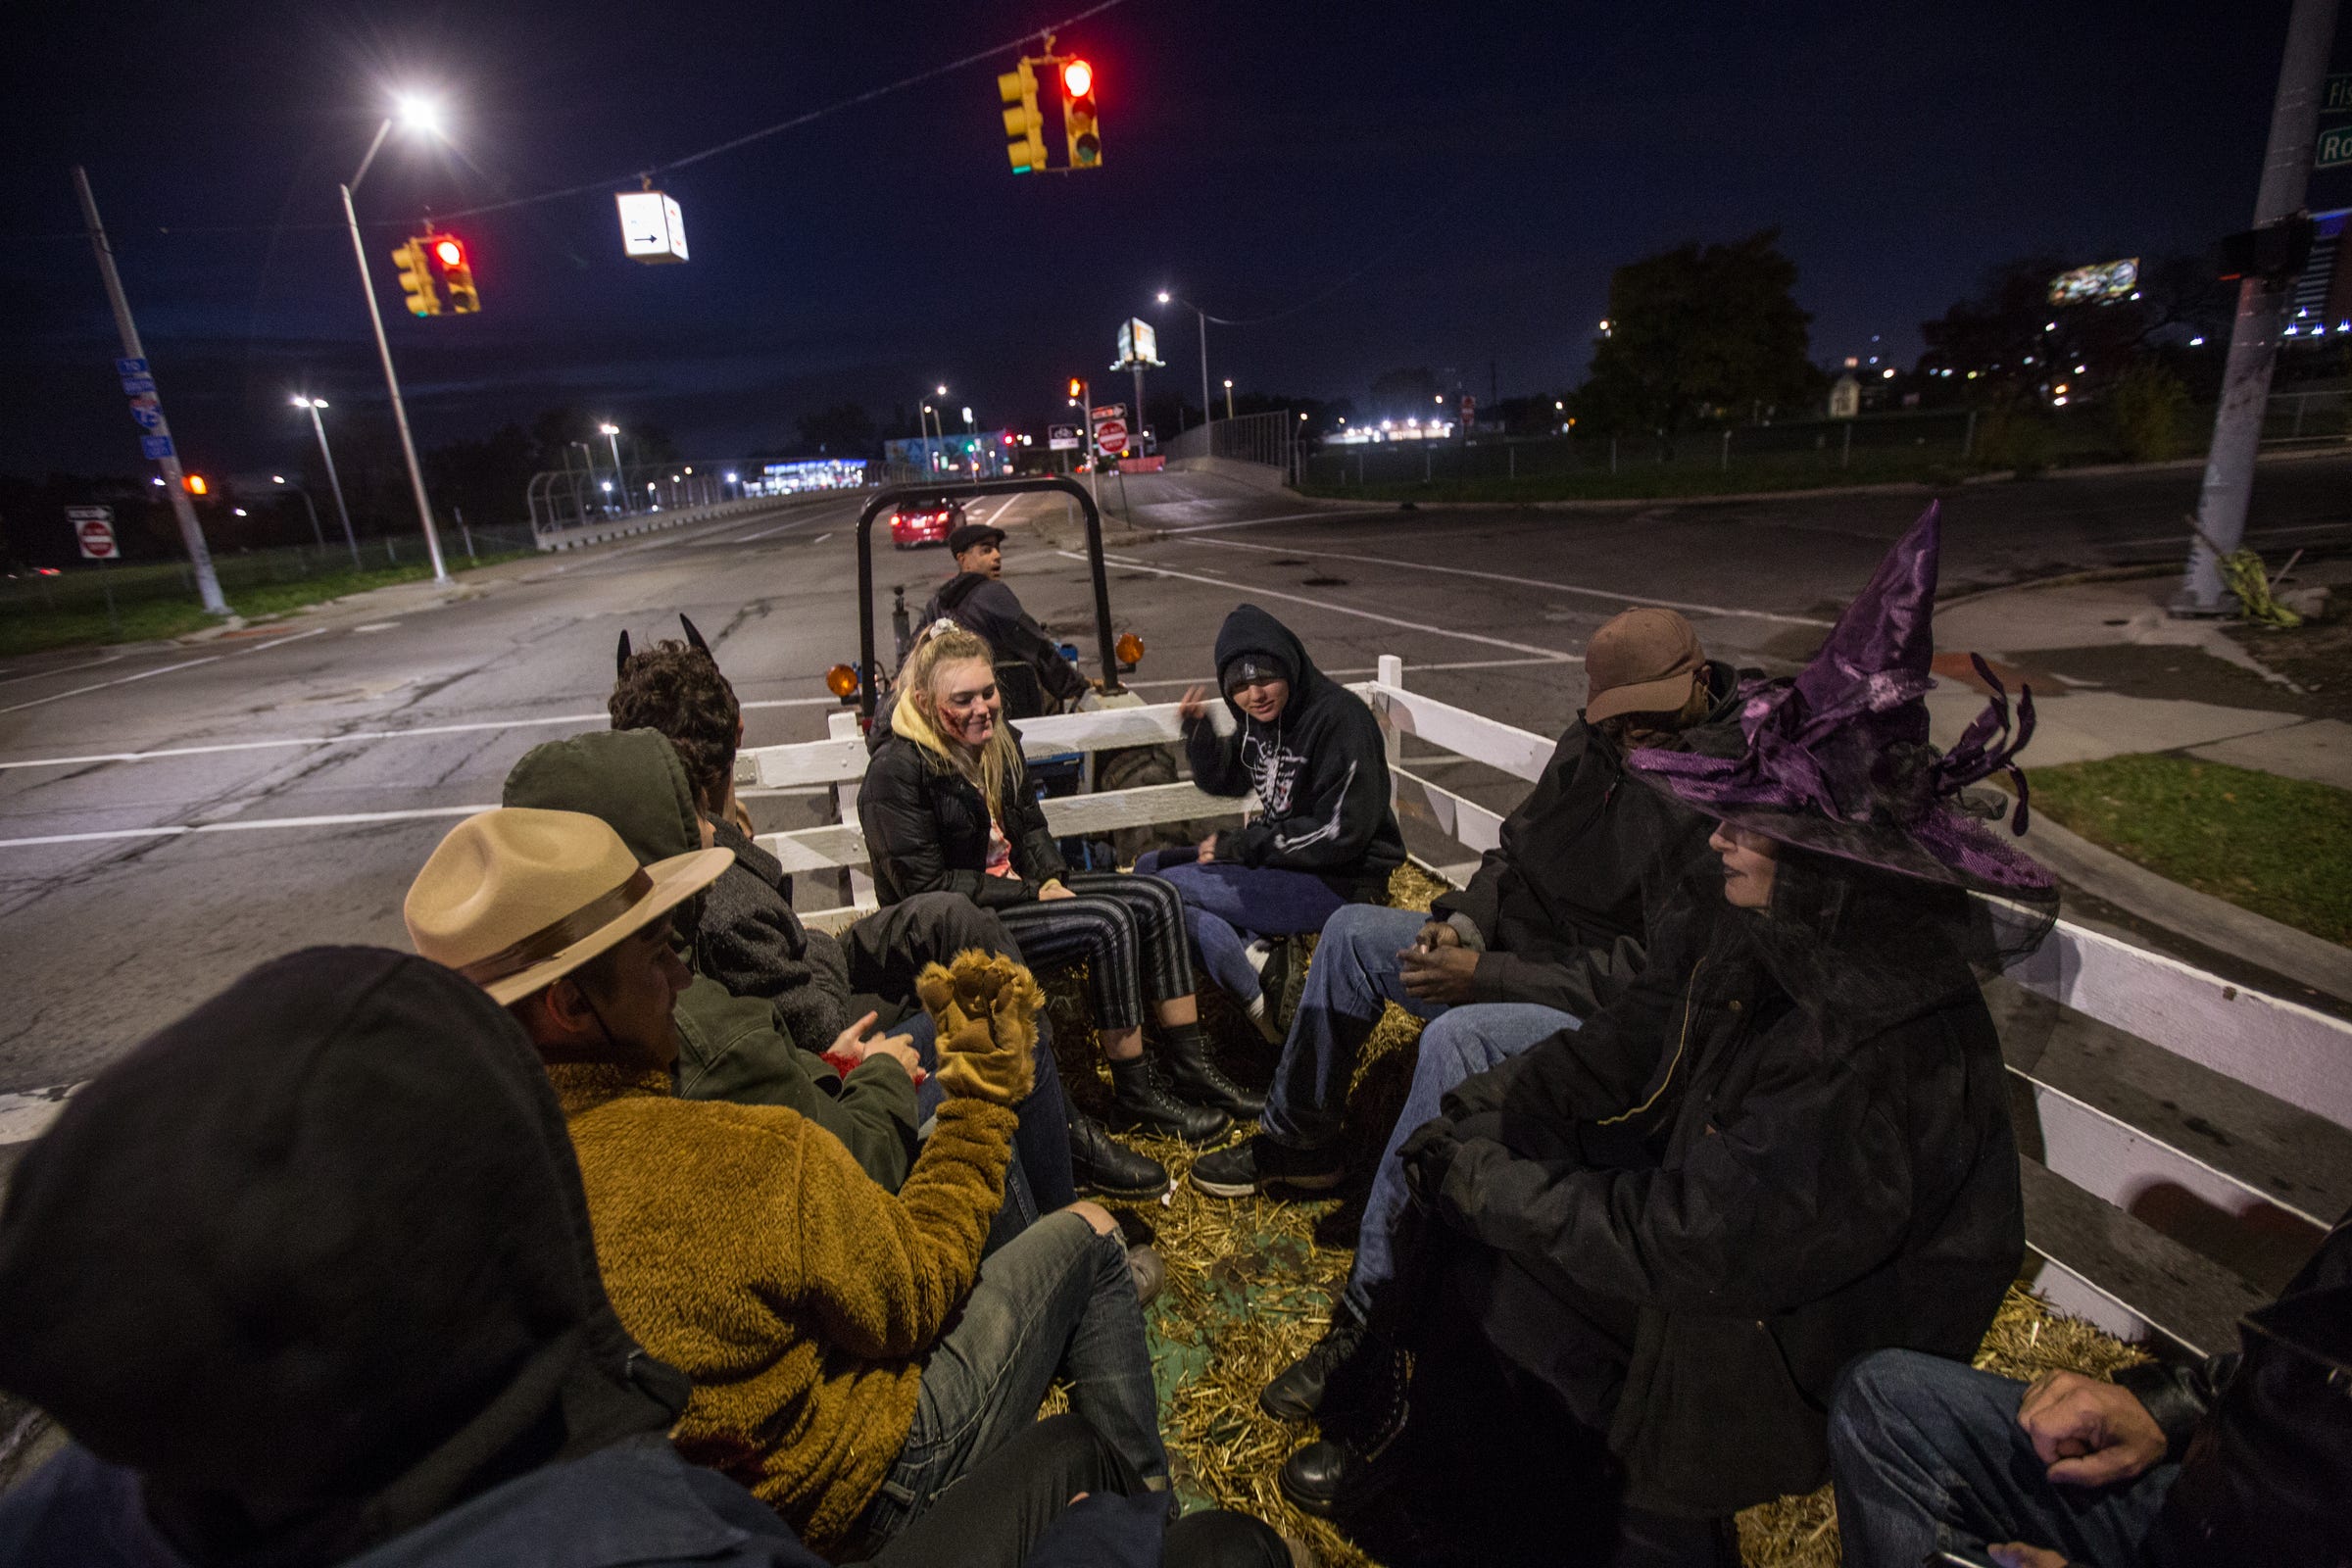 Kristyn Koth (right) of Detroit and her daughters Sojourner Posch (center left) and Pepiot Posch (center right) ride along in a hayride being driven by neighbor Greg Willerer through Detroit's Corktown neighborhood on Thursday, Oct. 31, 2018.